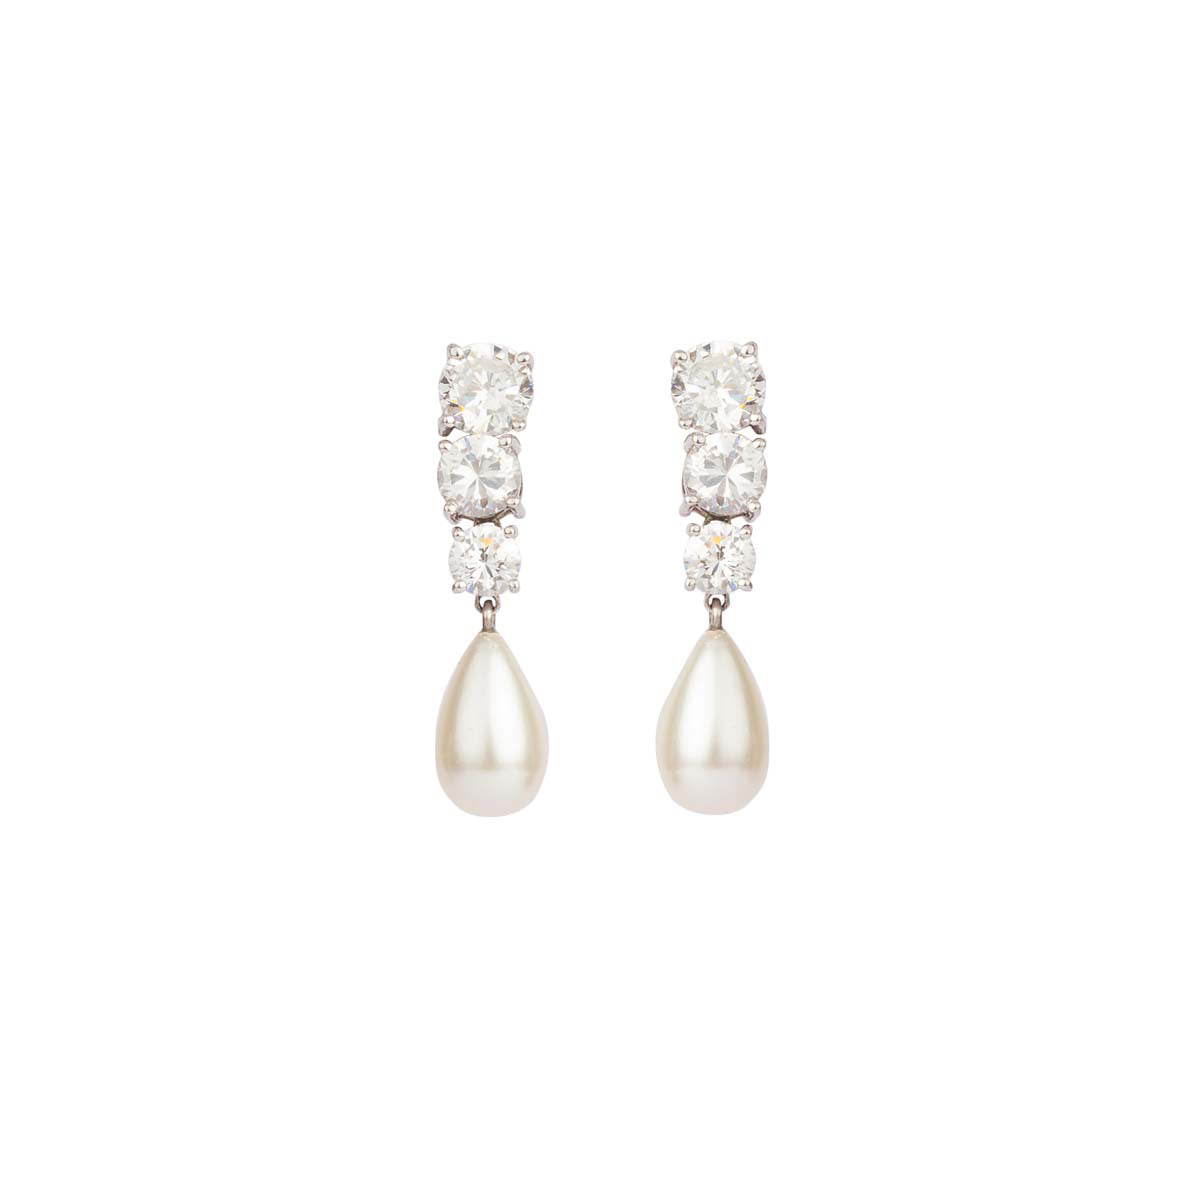 Studded with the shine of a thousand stars, these earrings are made of three solitaires of descending size finished with a perfect pearl drop set in silver.